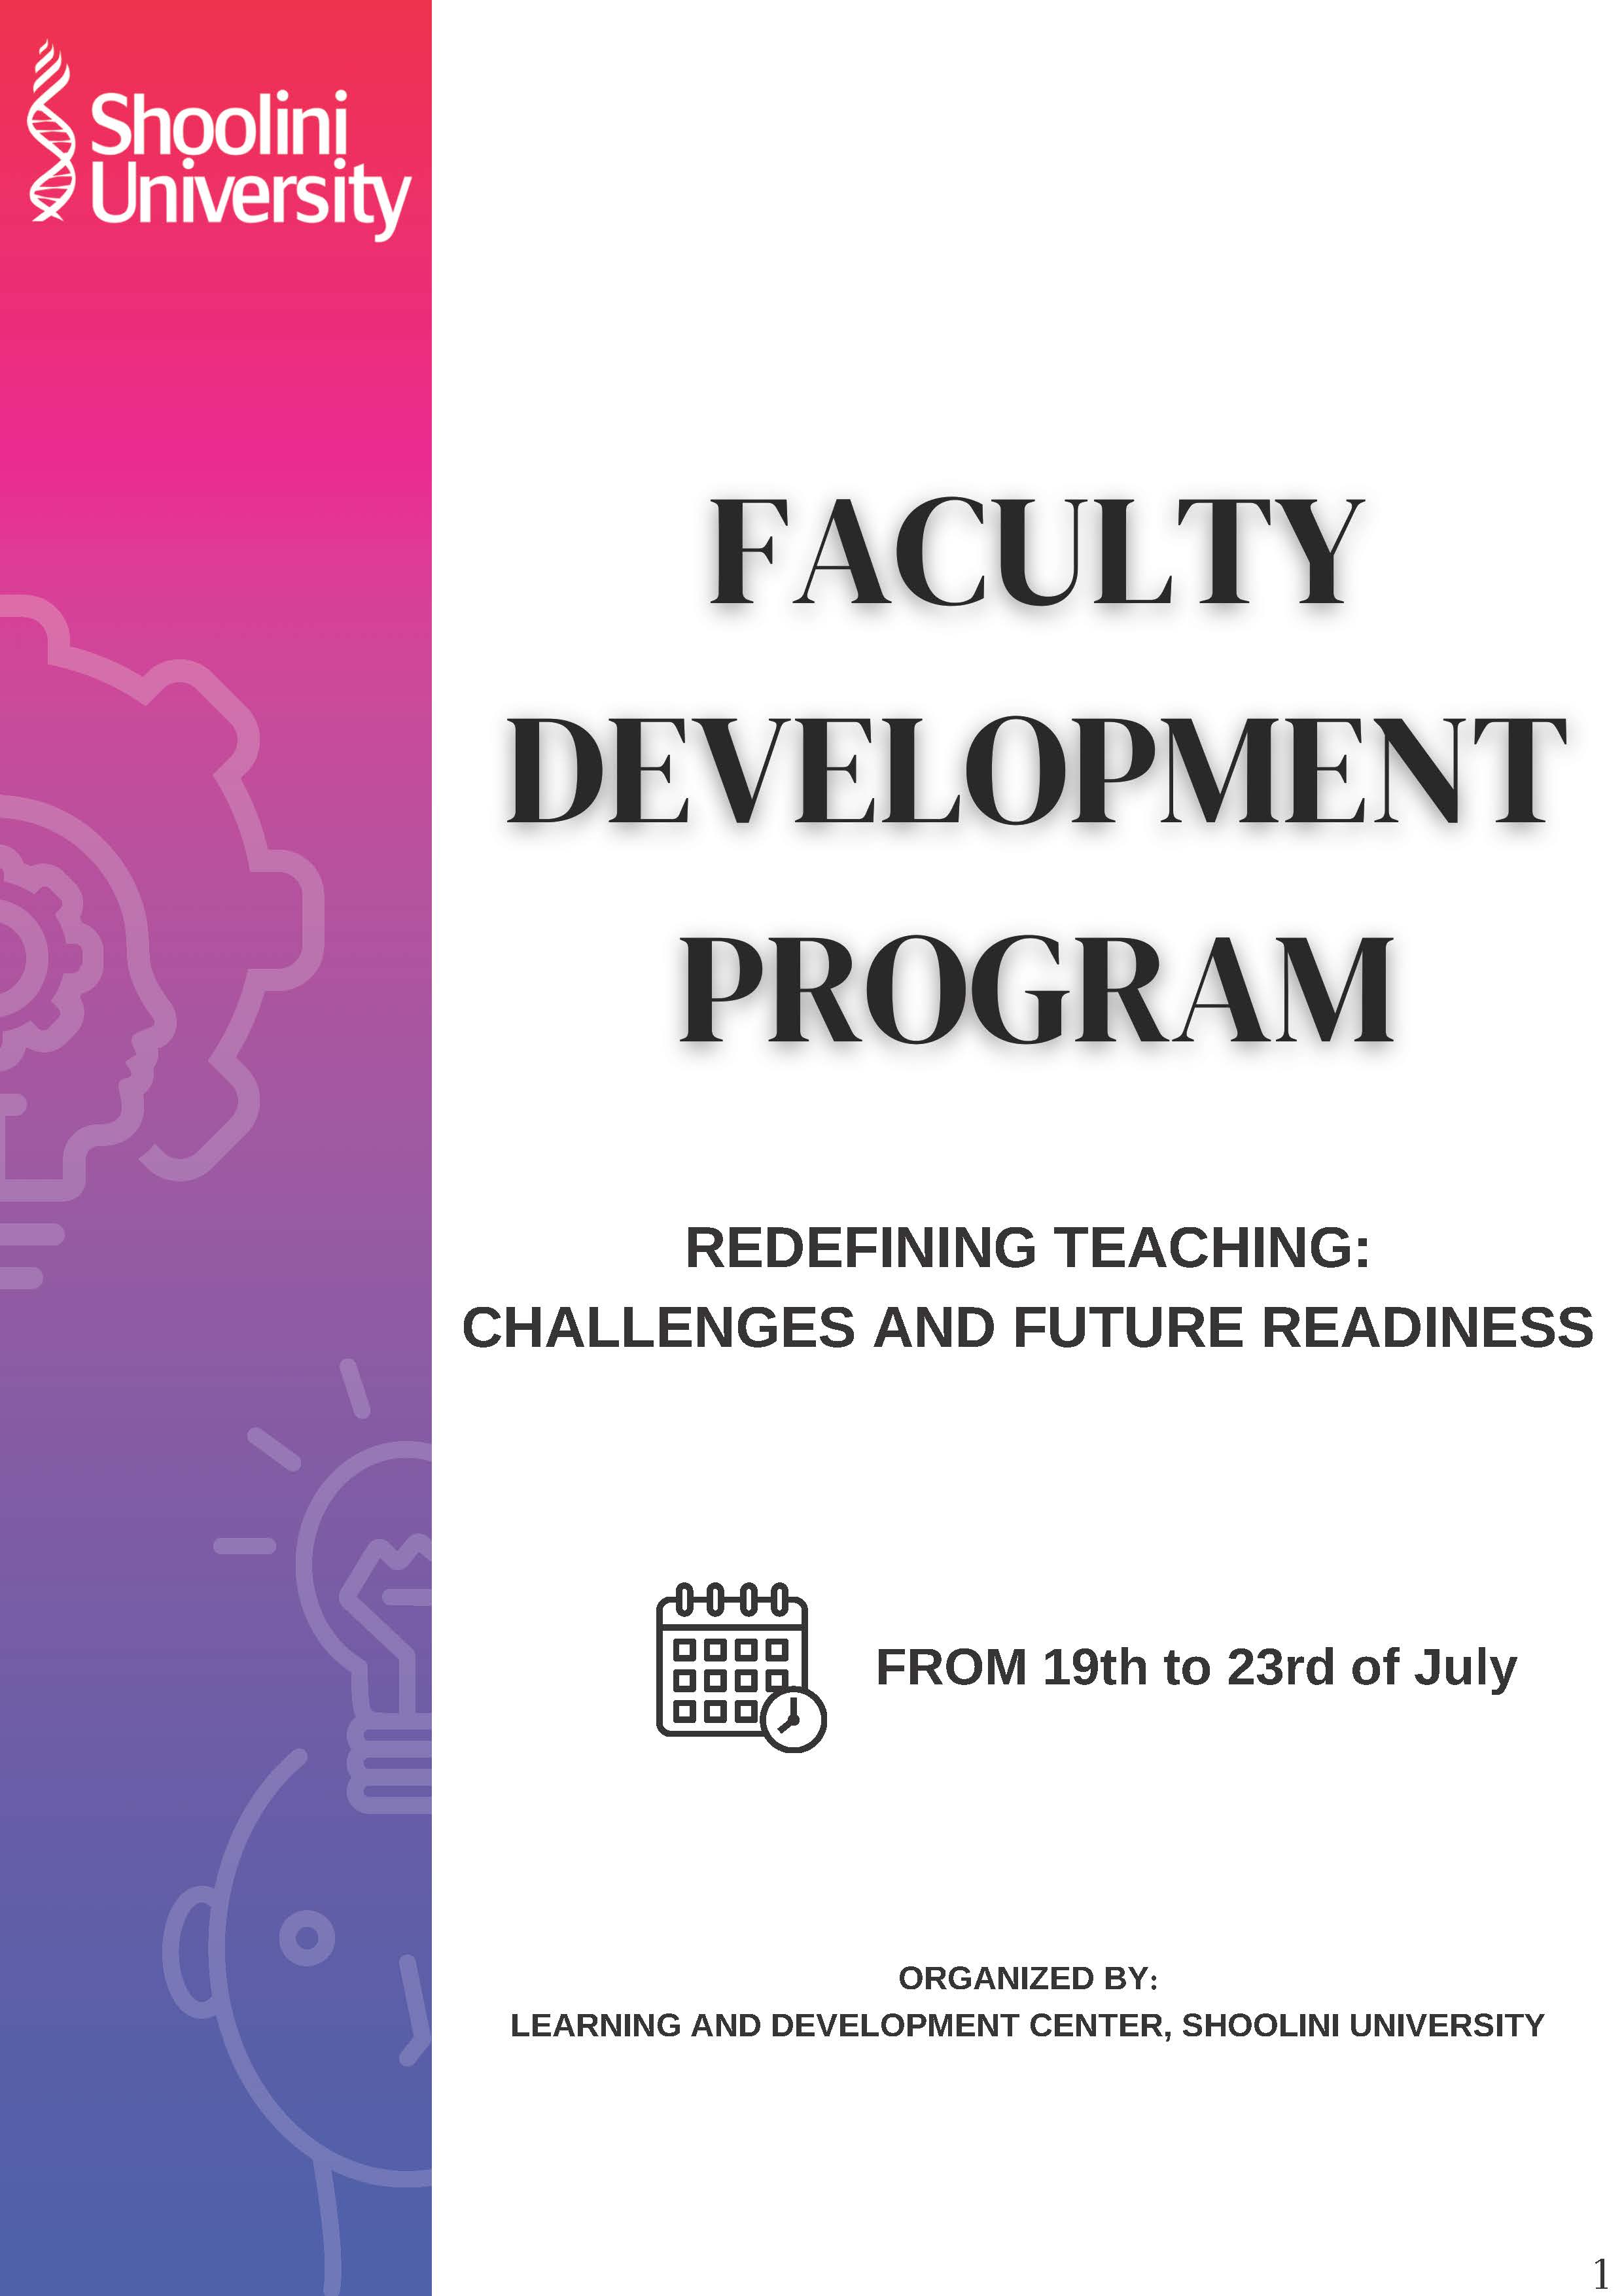 FDP - REDEFINING TEACHING: CHALLENGES AND FUTURE READINESS